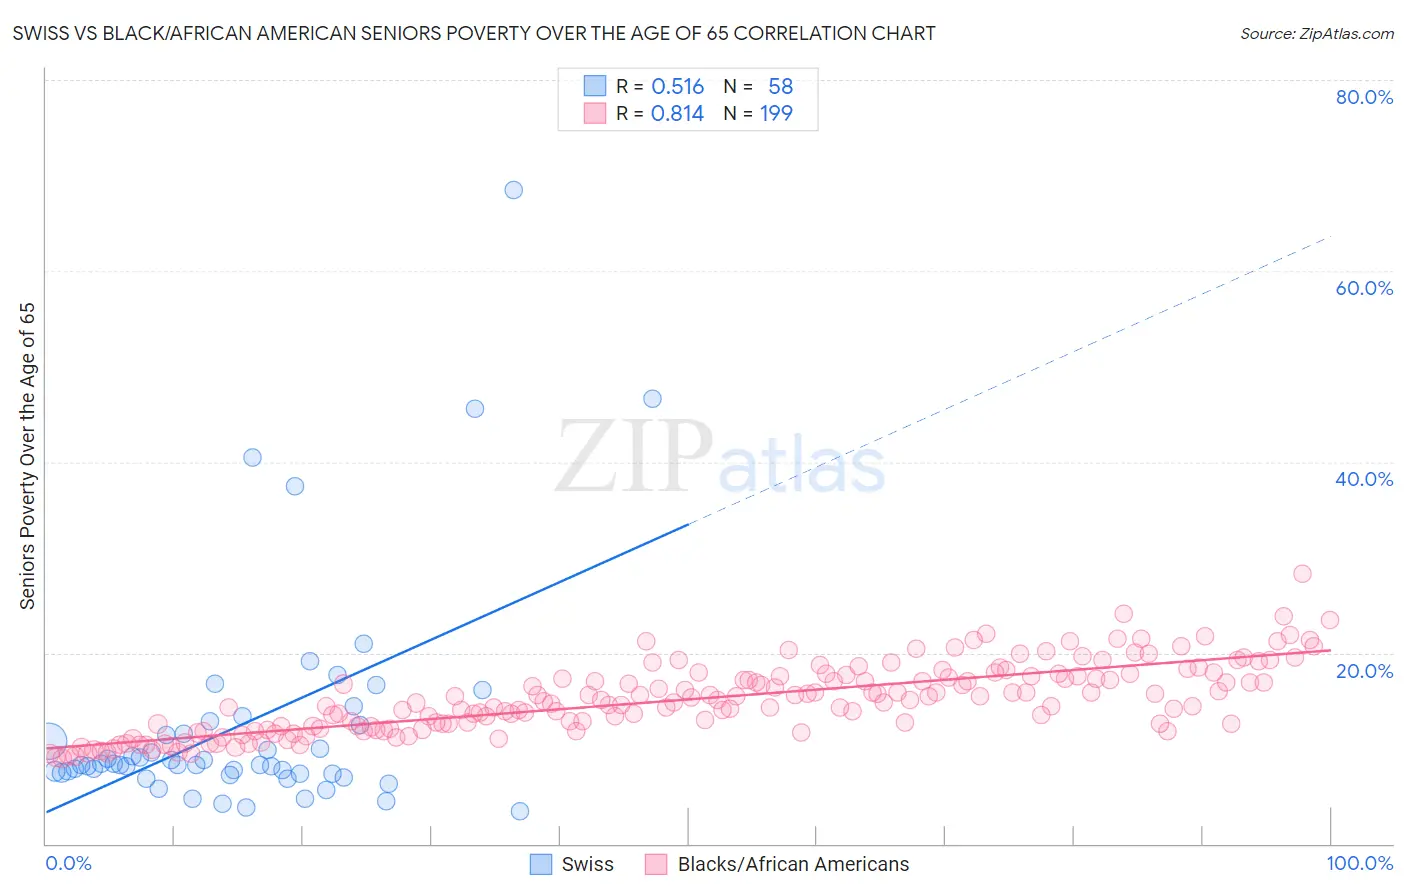 Swiss vs Black/African American Seniors Poverty Over the Age of 65